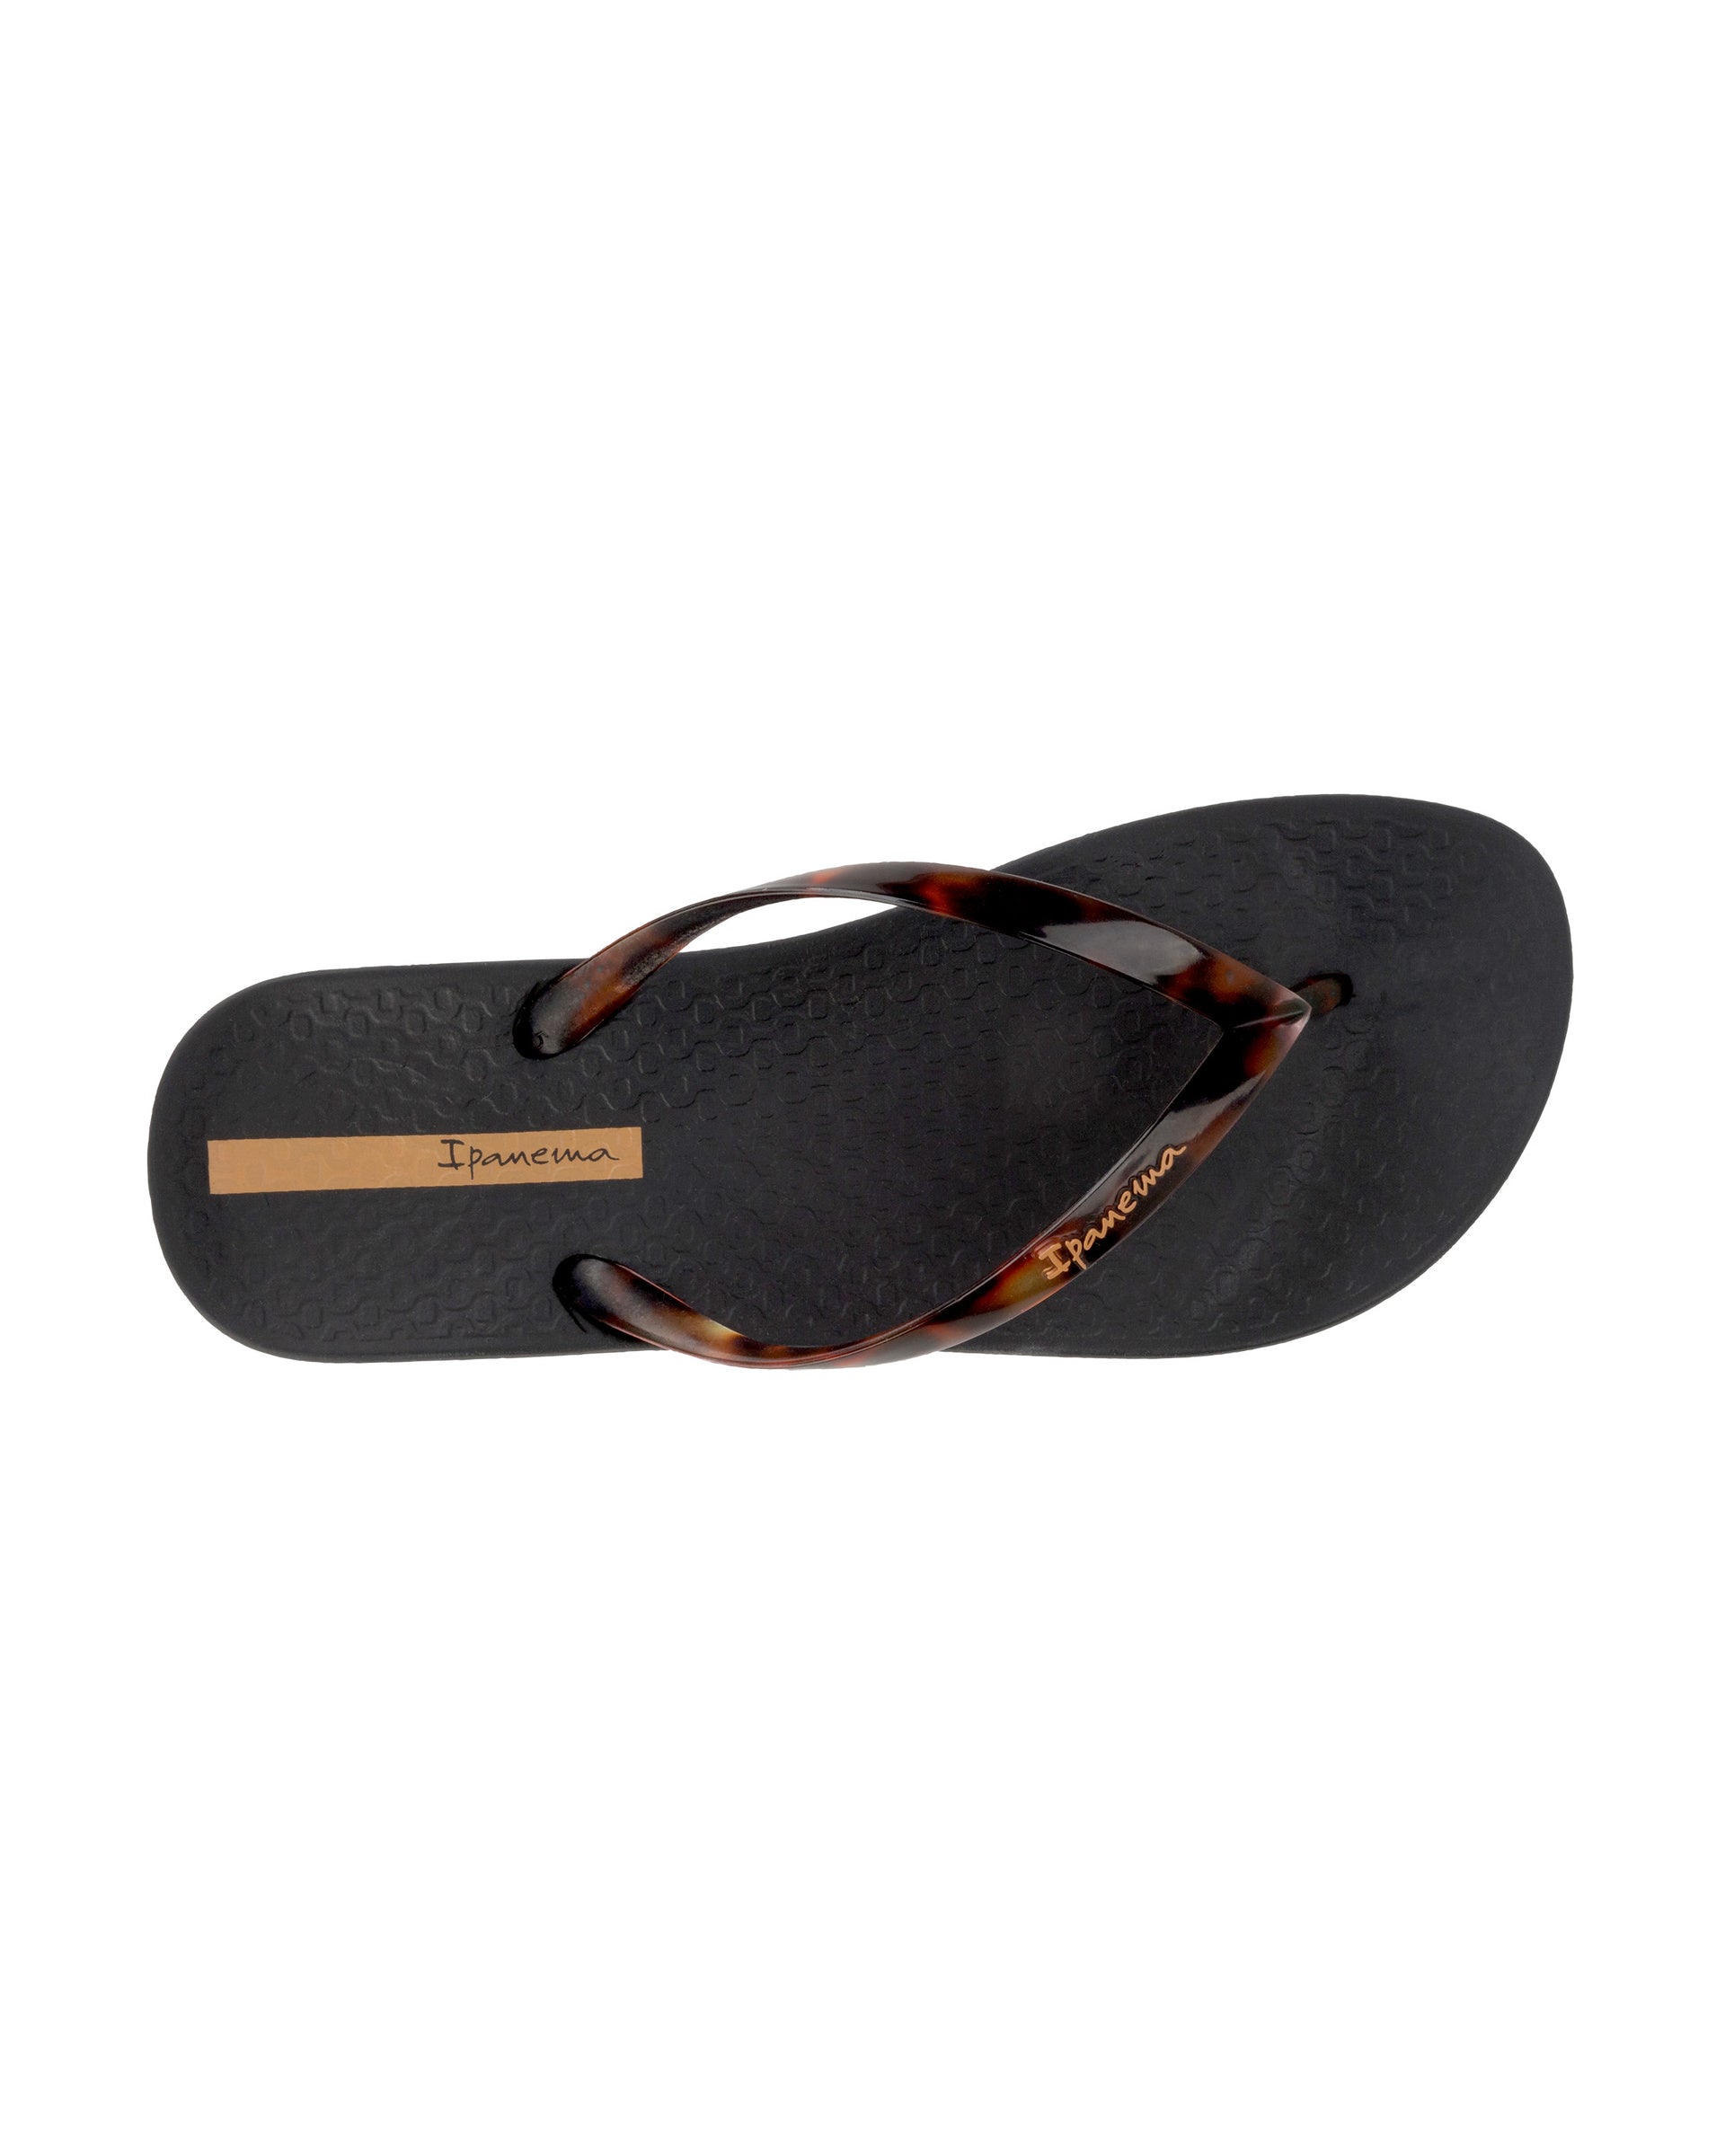 Top view of a black Ipanema Ana Connect women's flip flop with brown tortoiseshell  color strap.